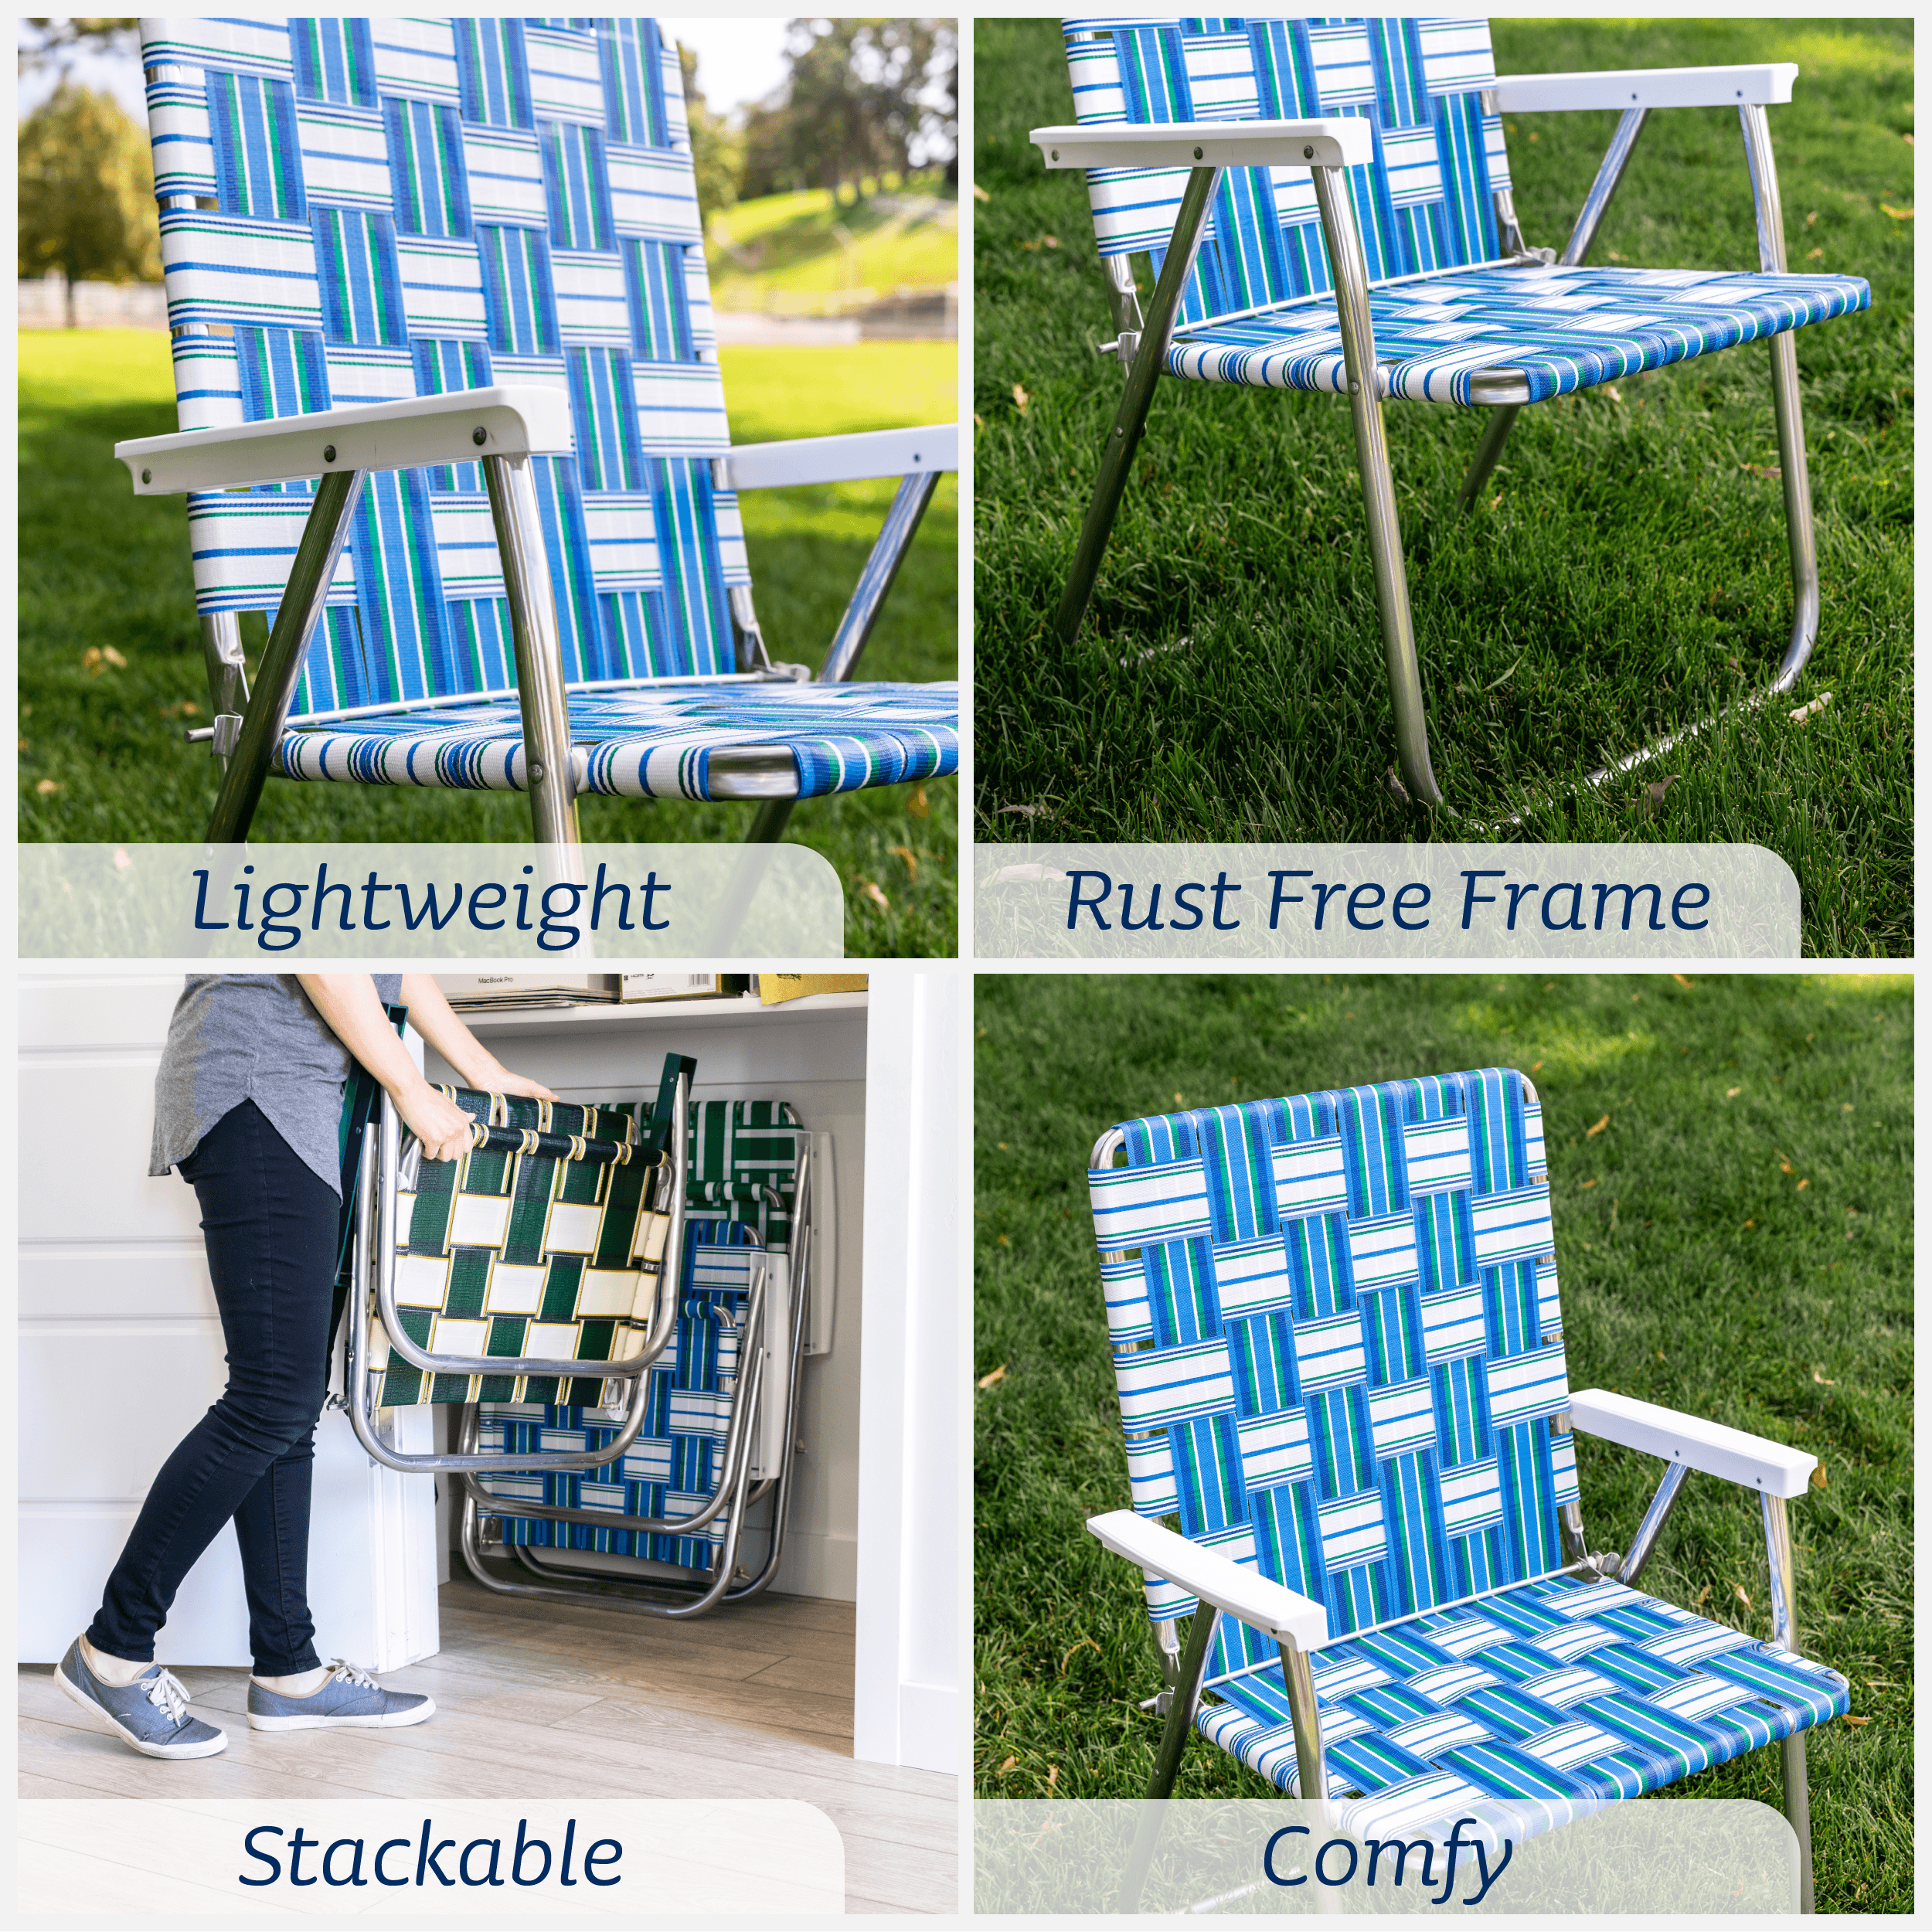 Lawn Chair USA - Classic Folding Aluminum Webbed Chair - Durable, Portable, and Comfortable Outdoor Chair - Ideal for Camping, Sports, and Concerts - Blue and Silver with Blue arms - image 5 of 7